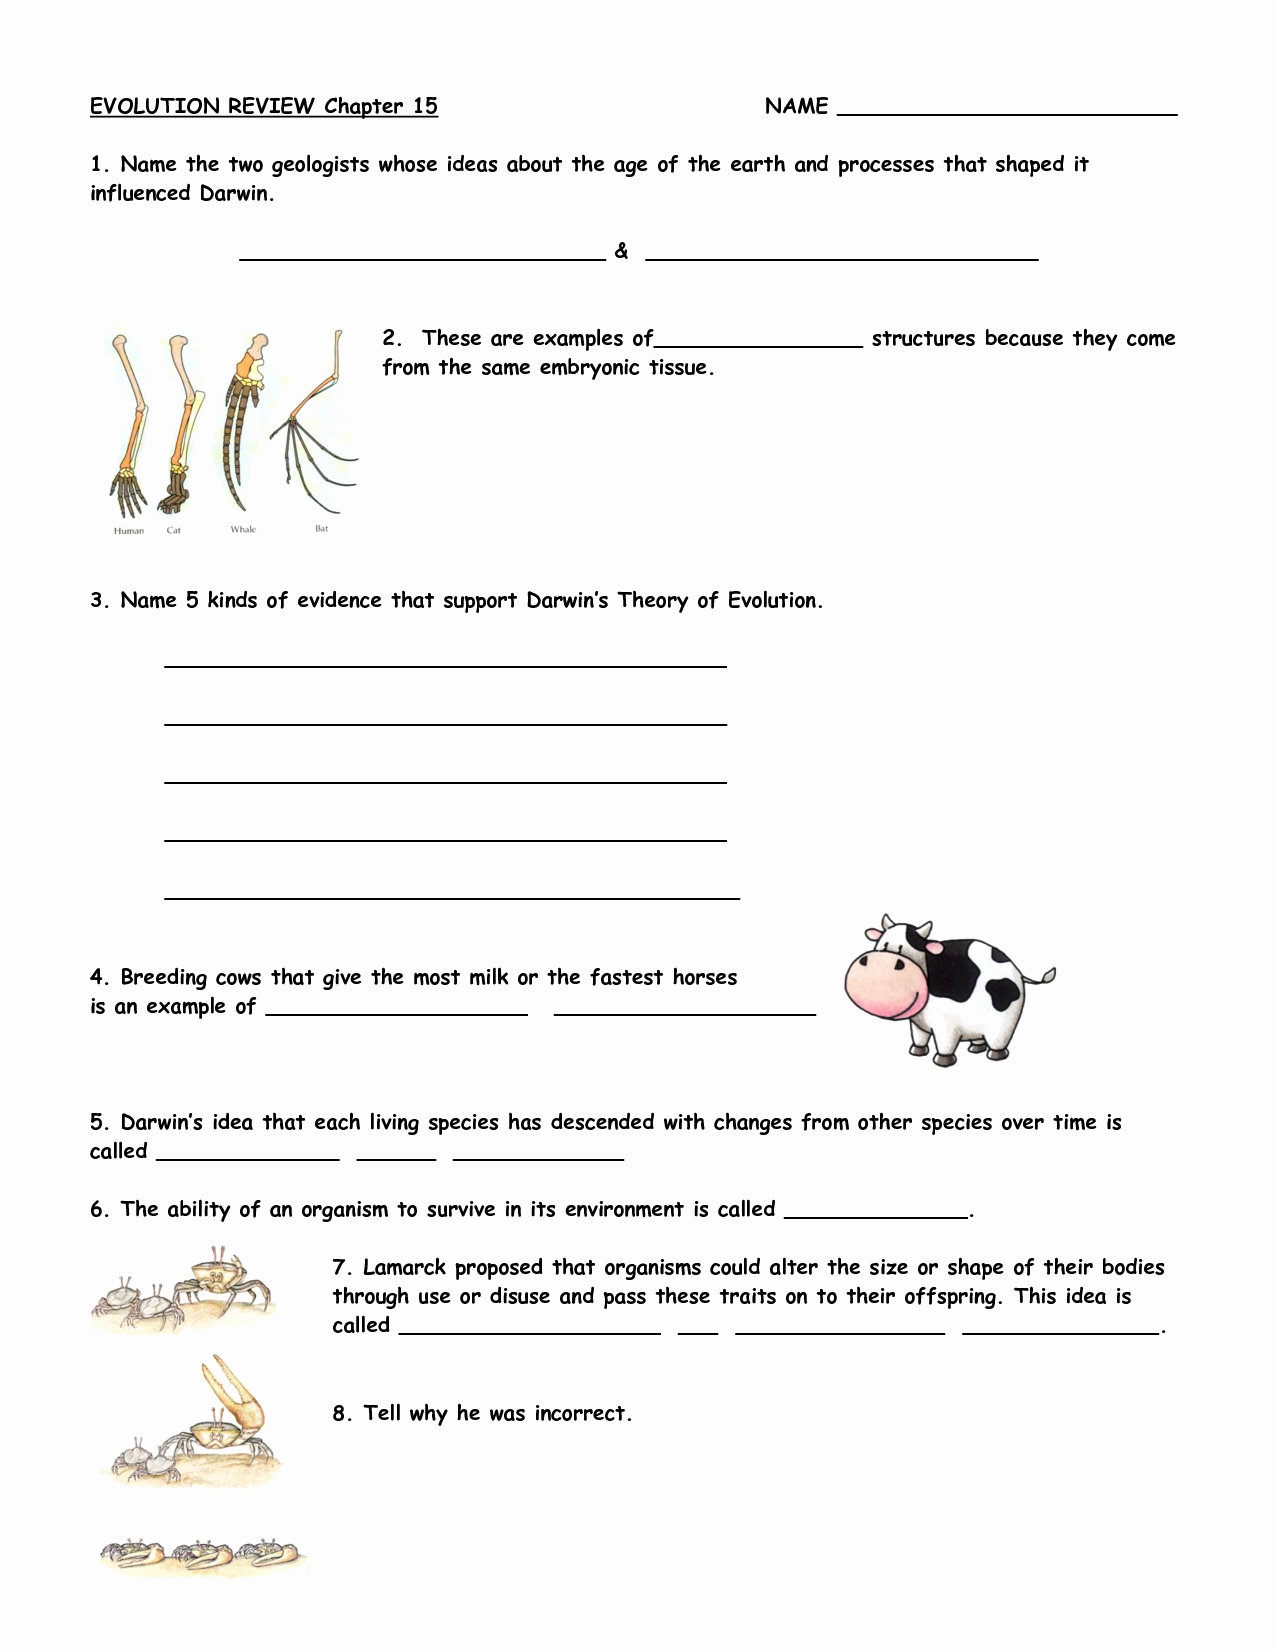 Evolution and Natural Selection Worksheet Luxury Darwin S theory Of Evolution Worksheet